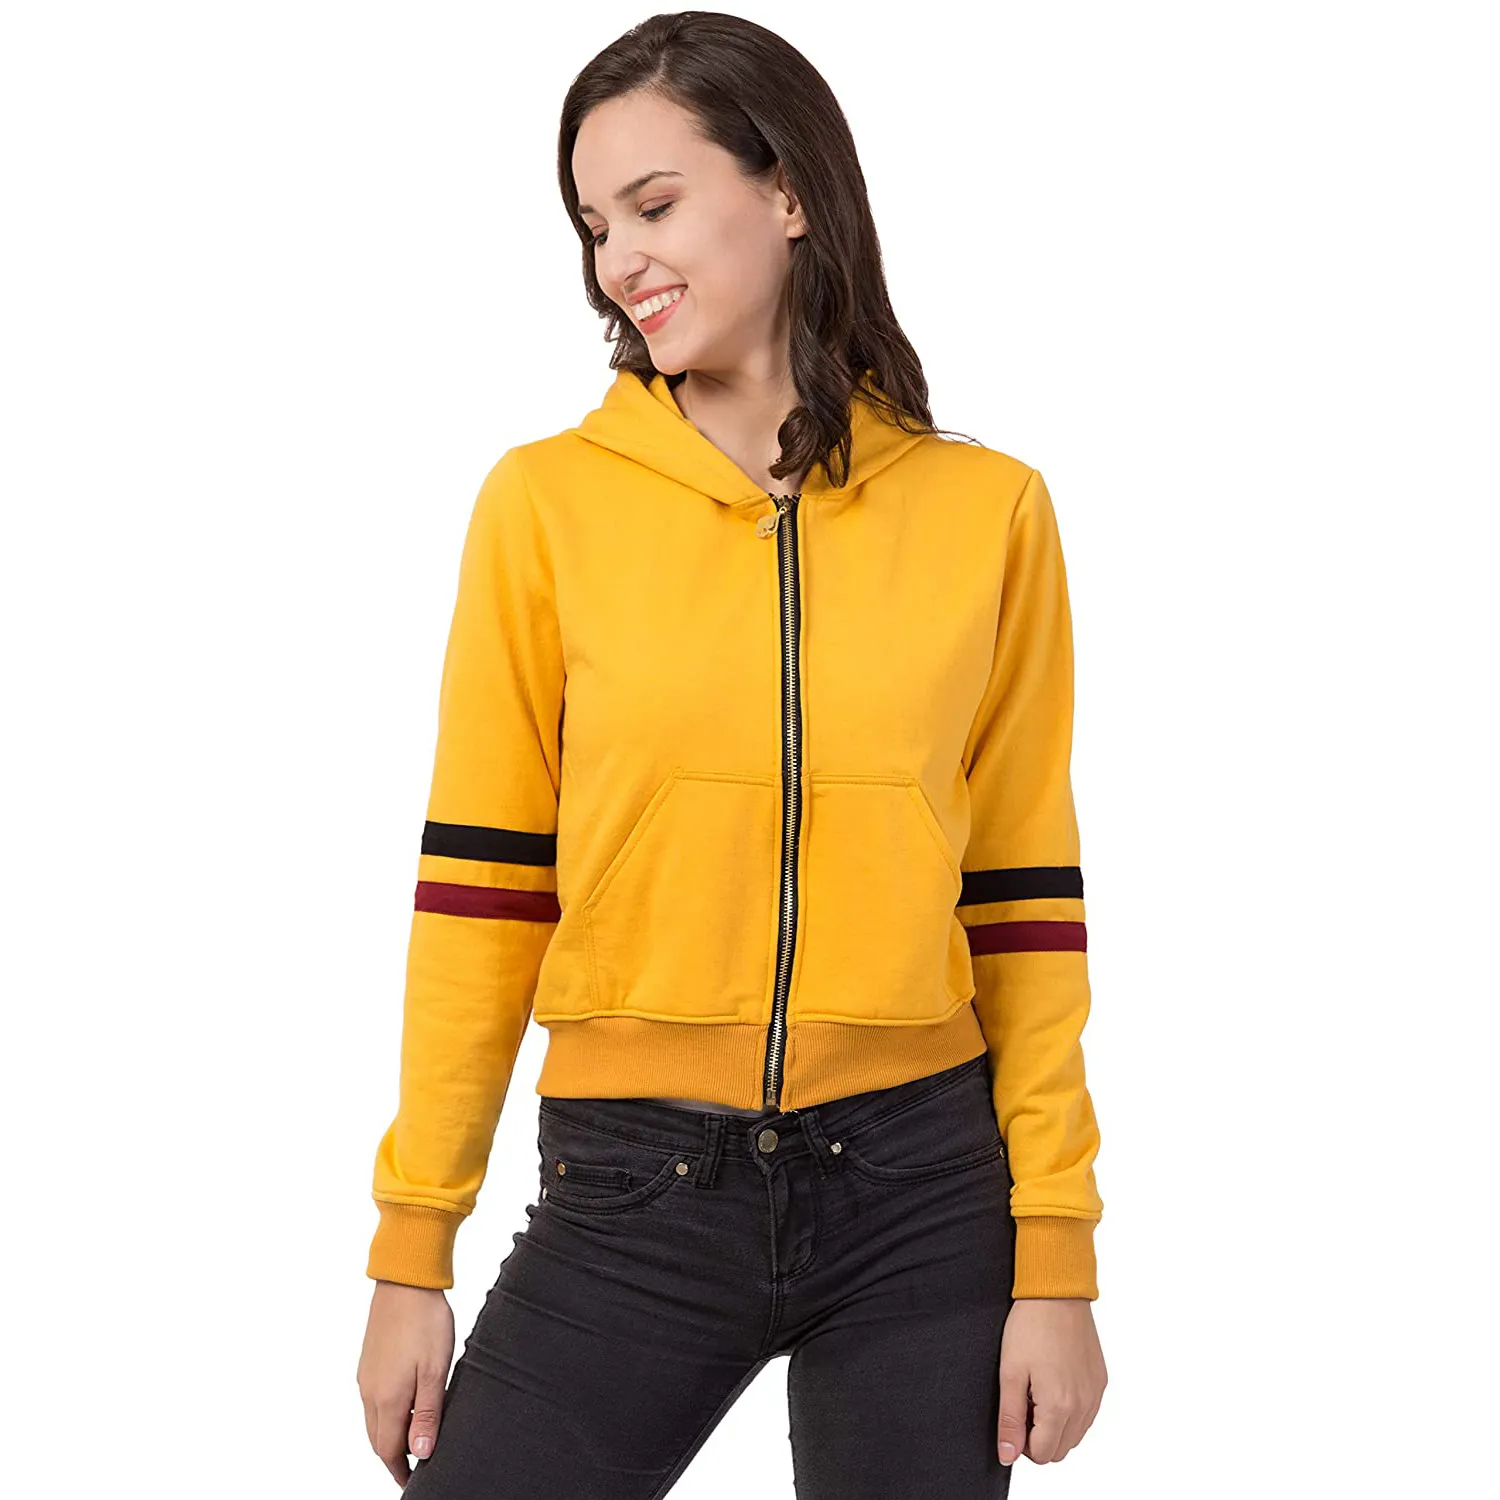 Top quality Hoodie Yellow Gold Hoodie with Maroon and Black stripes on Sleeves Eco Friendly Zipper up Street Style Hoodies